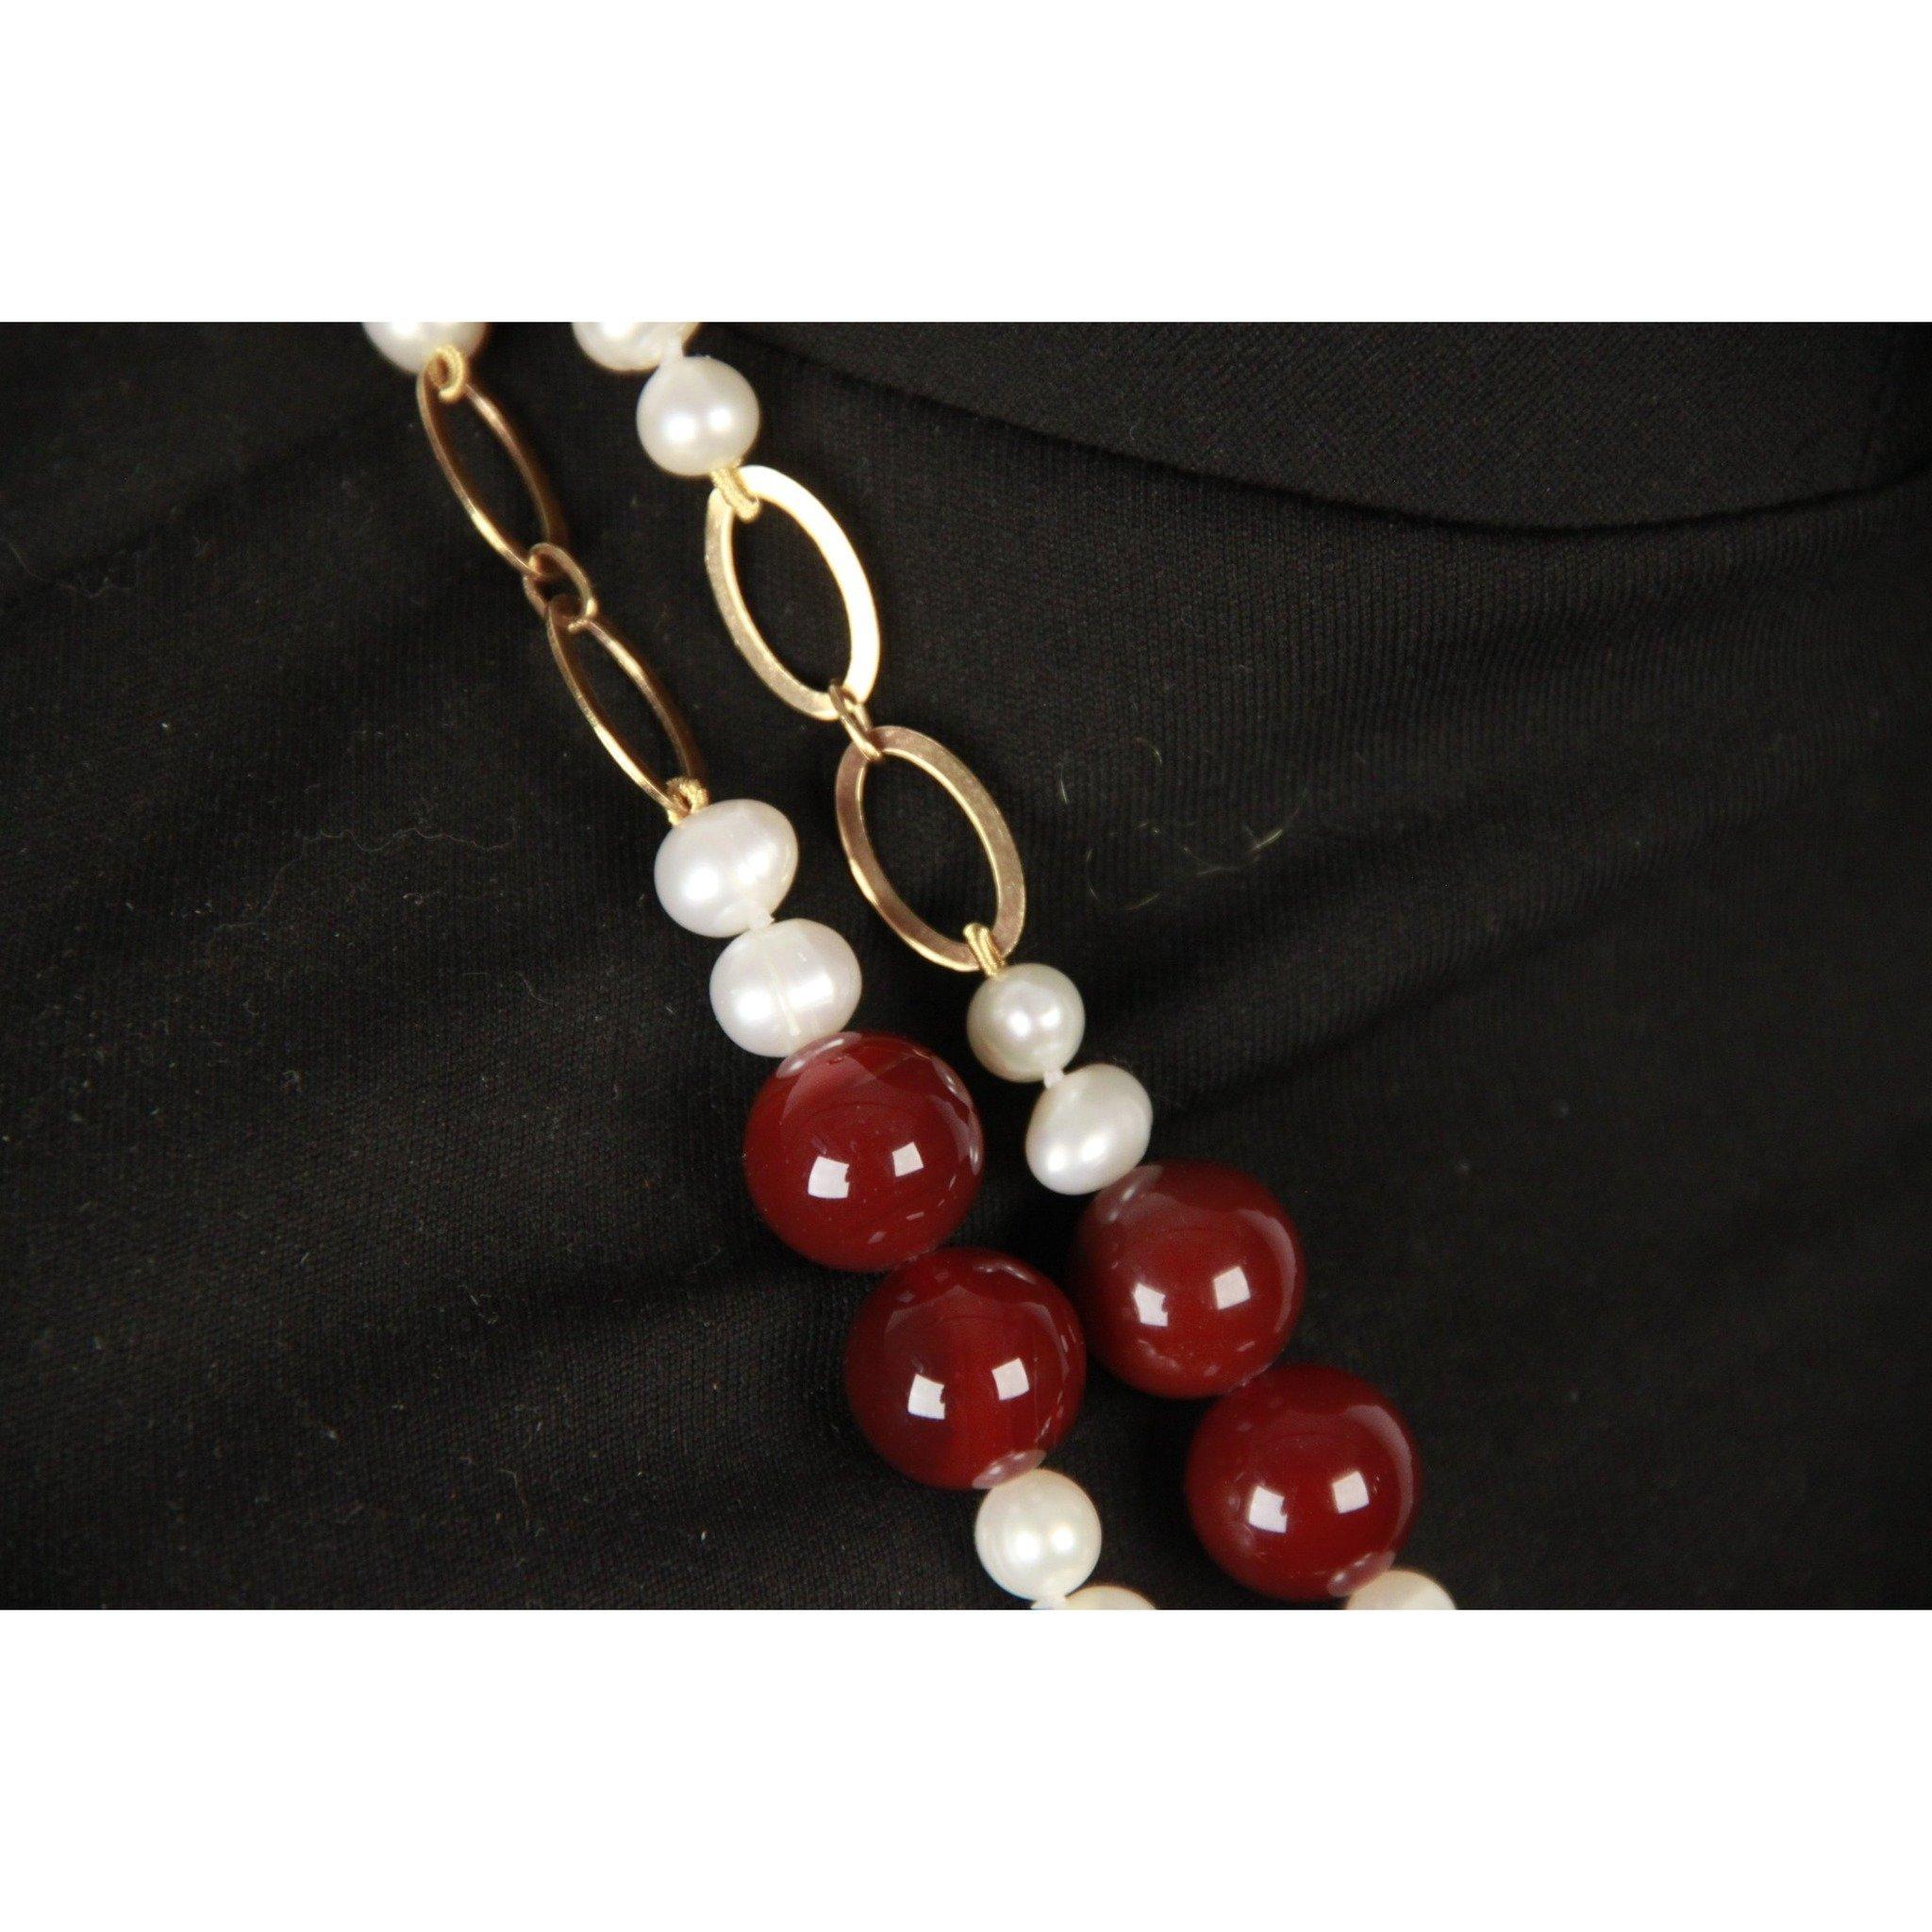 Handmade Silver 925 Necklace with Agate Baroque Pearls Beads 5